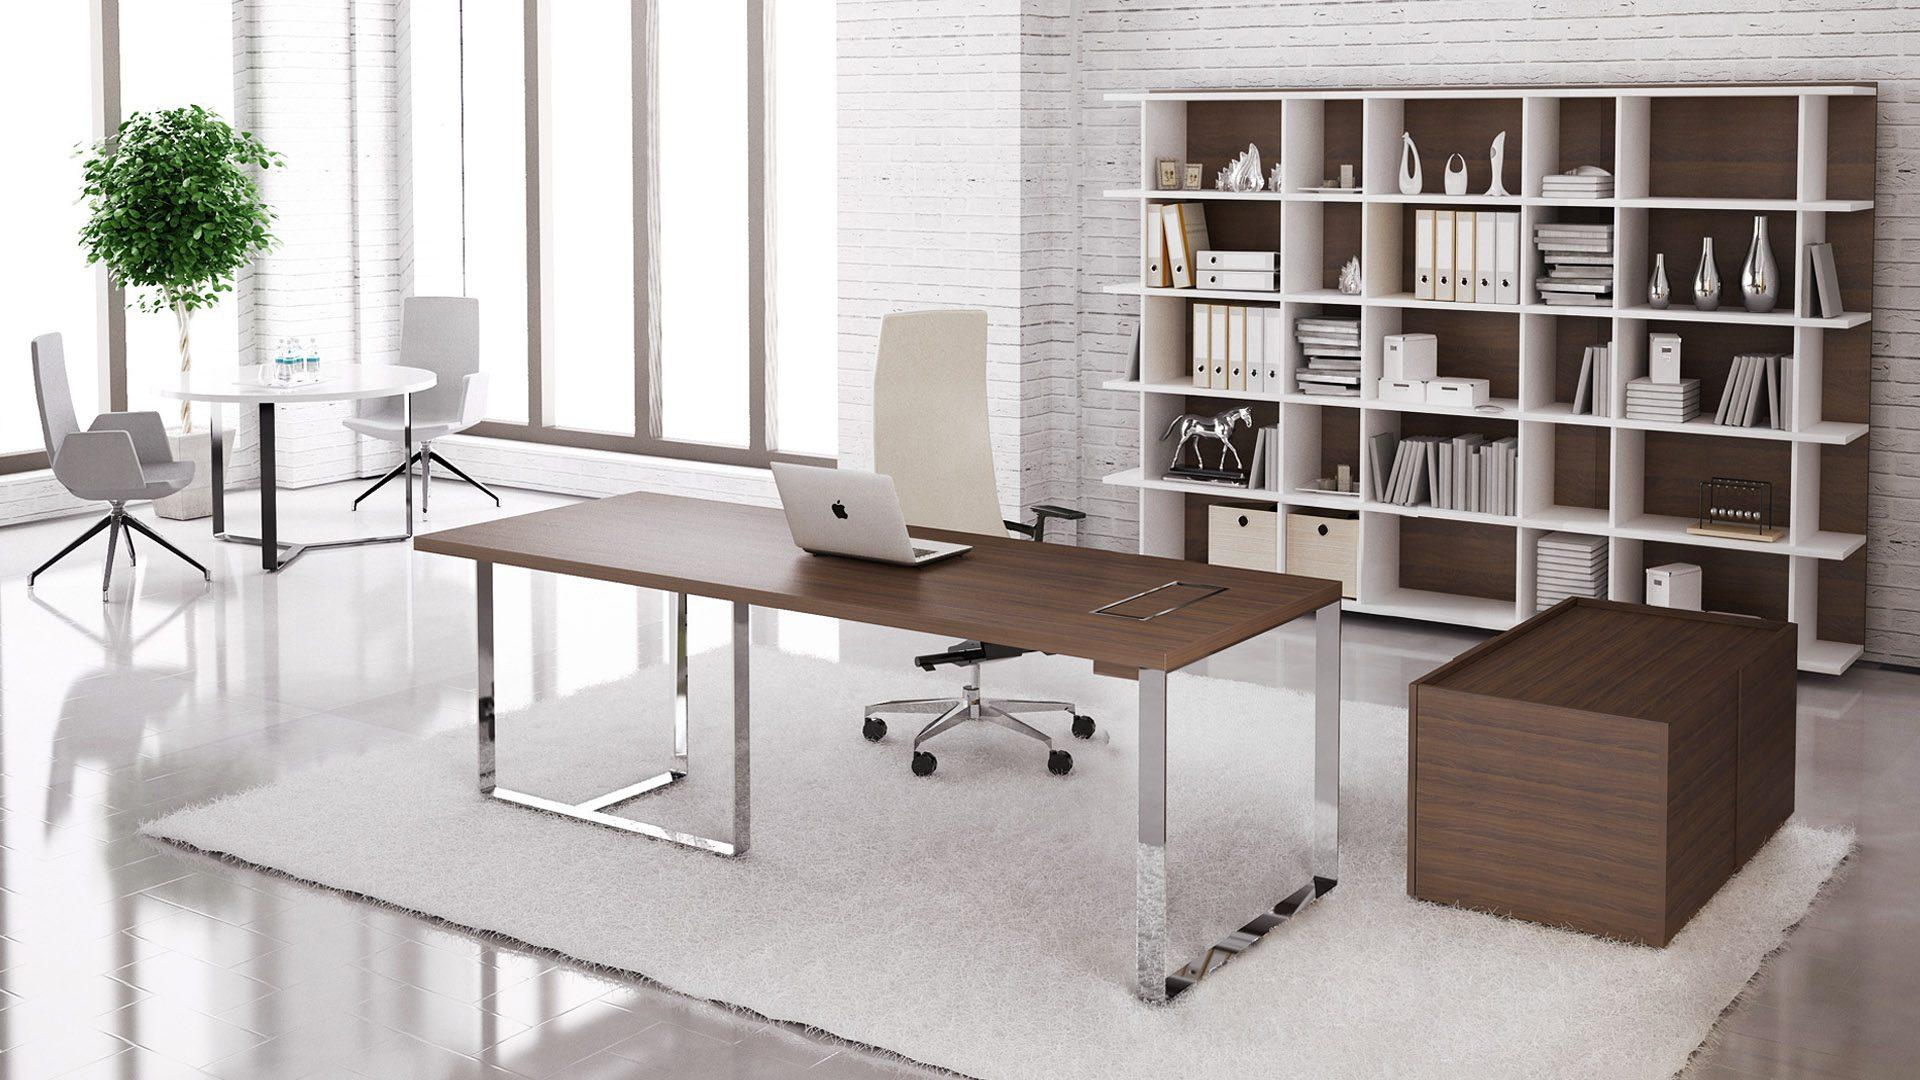 The Plana range includes executive desks, cabinets, shelves and meeting tables